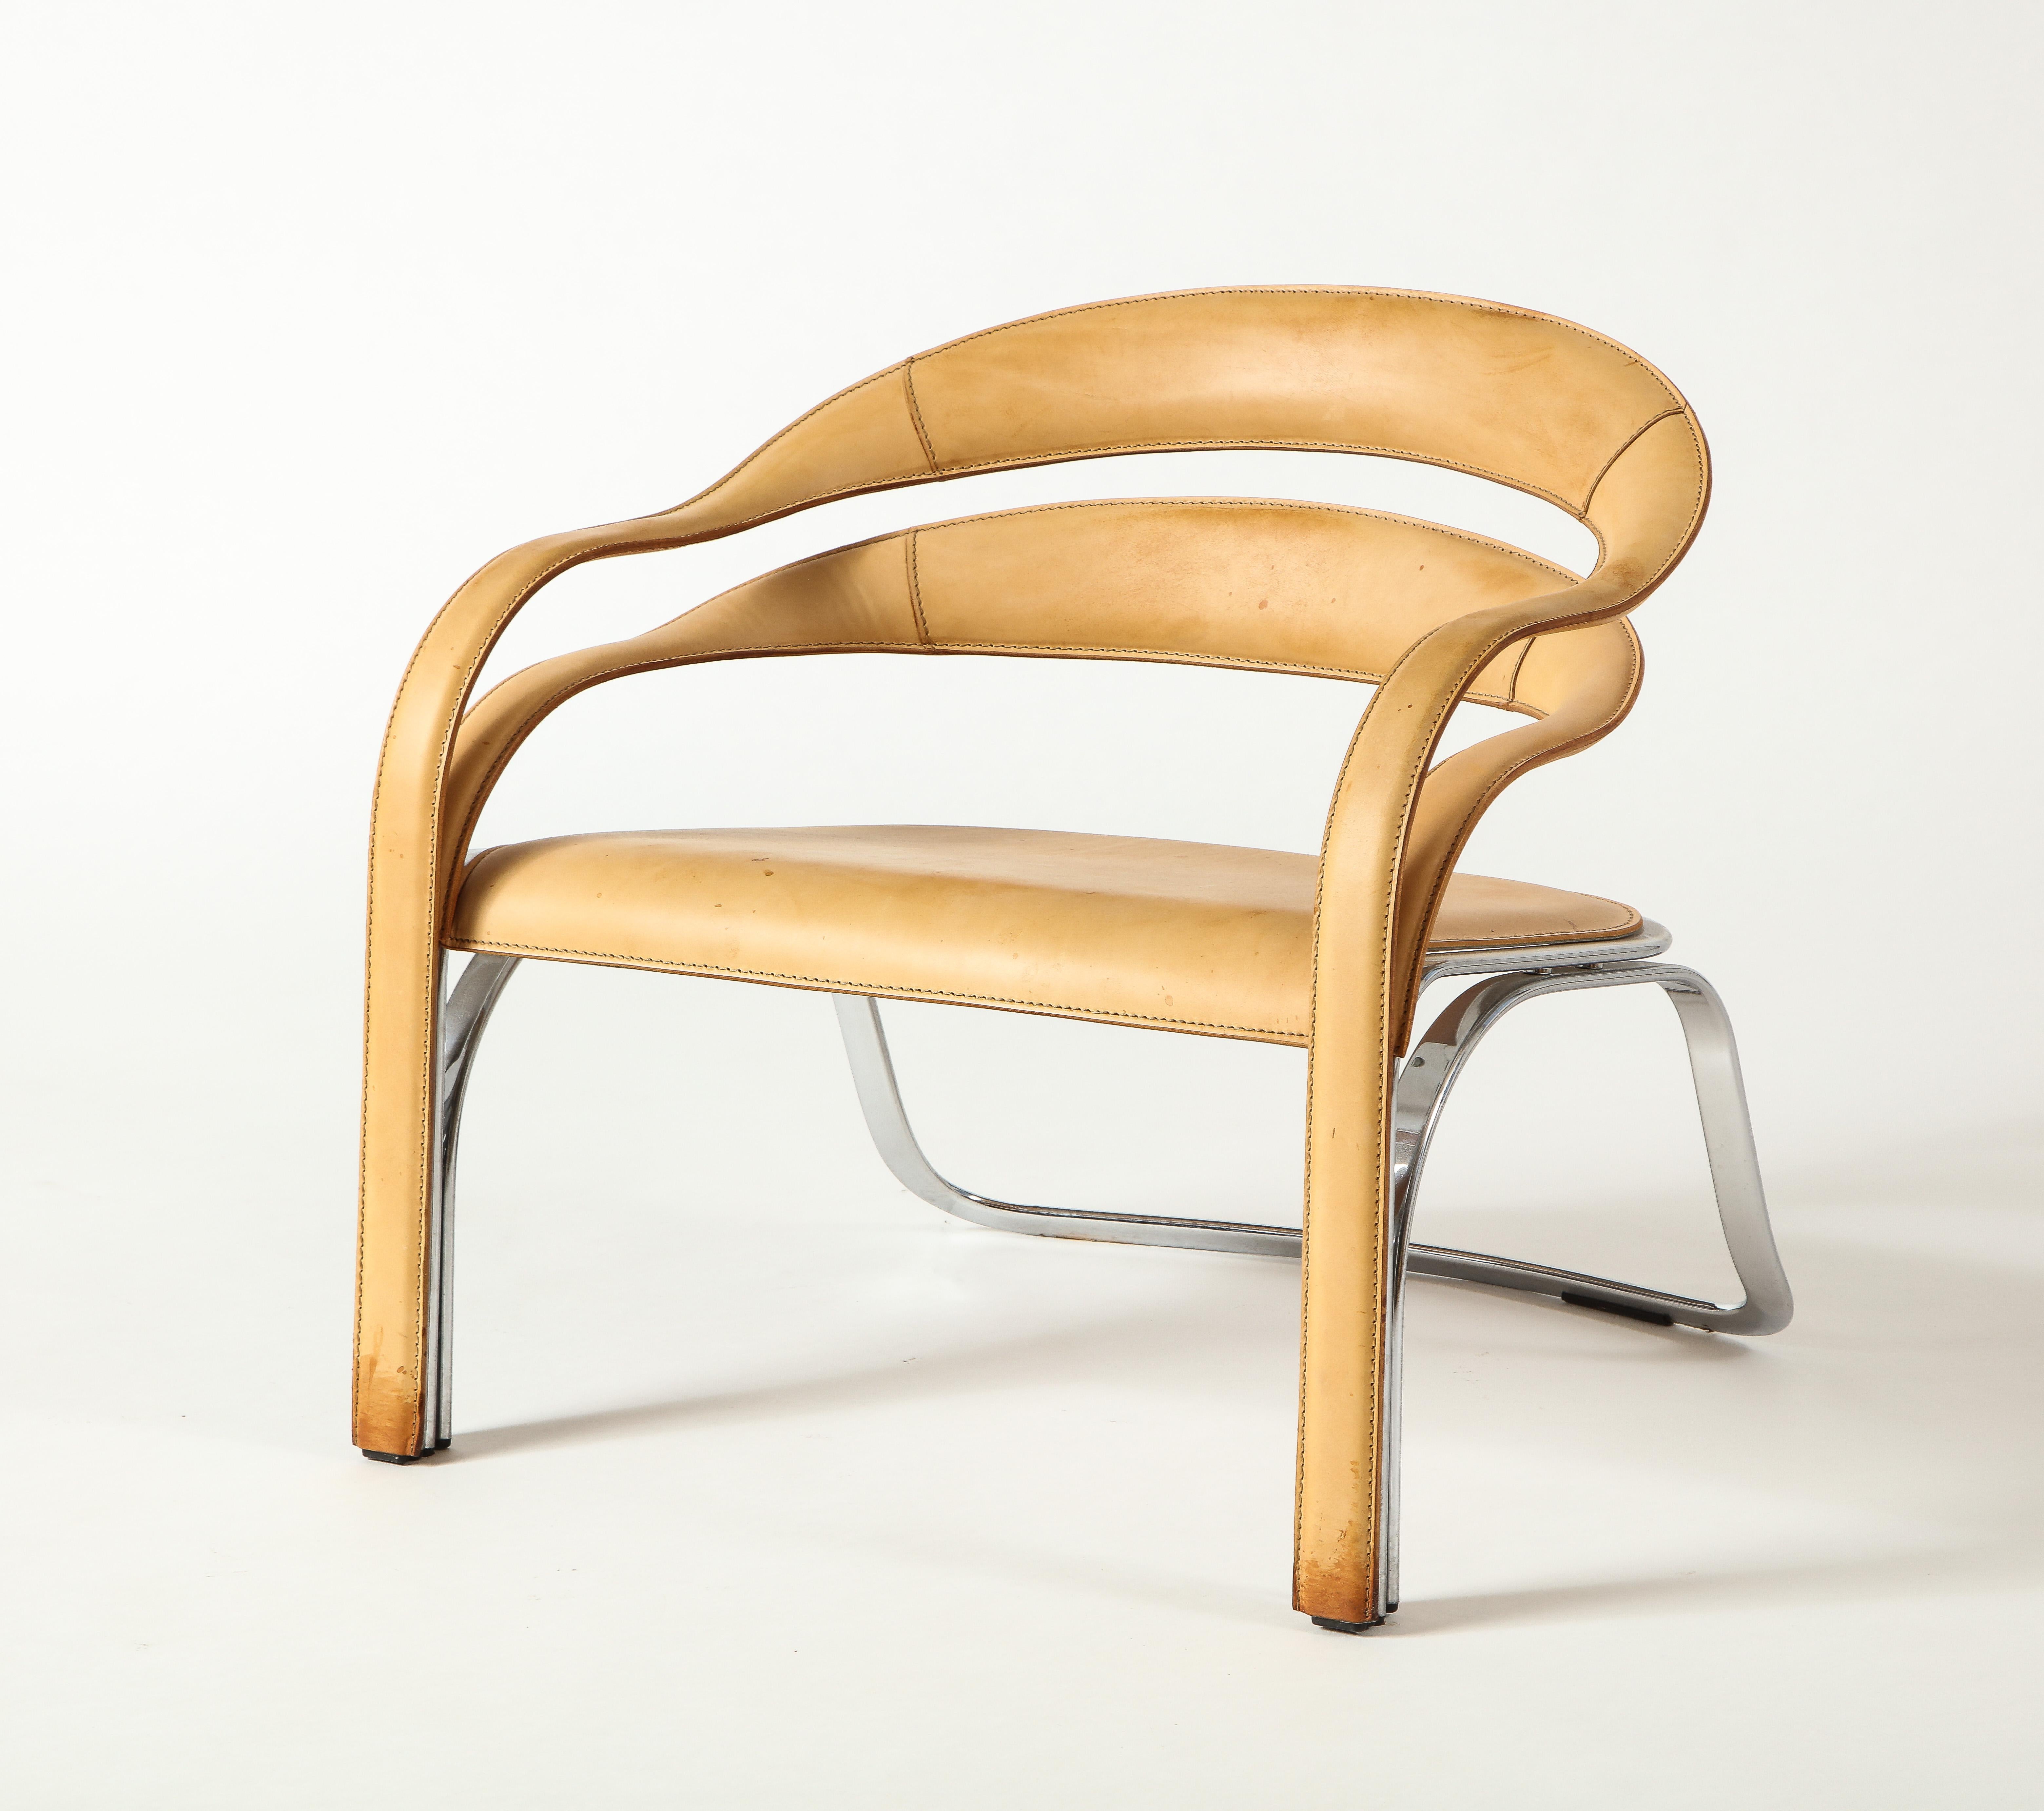 The kinetic lines of the Fettucini Chair fold together and gracefully join along the legs, drawing the eye across each contour. The floating backrest flows into twisting curves of the arms, with a precision reflecting the rigorous intention in